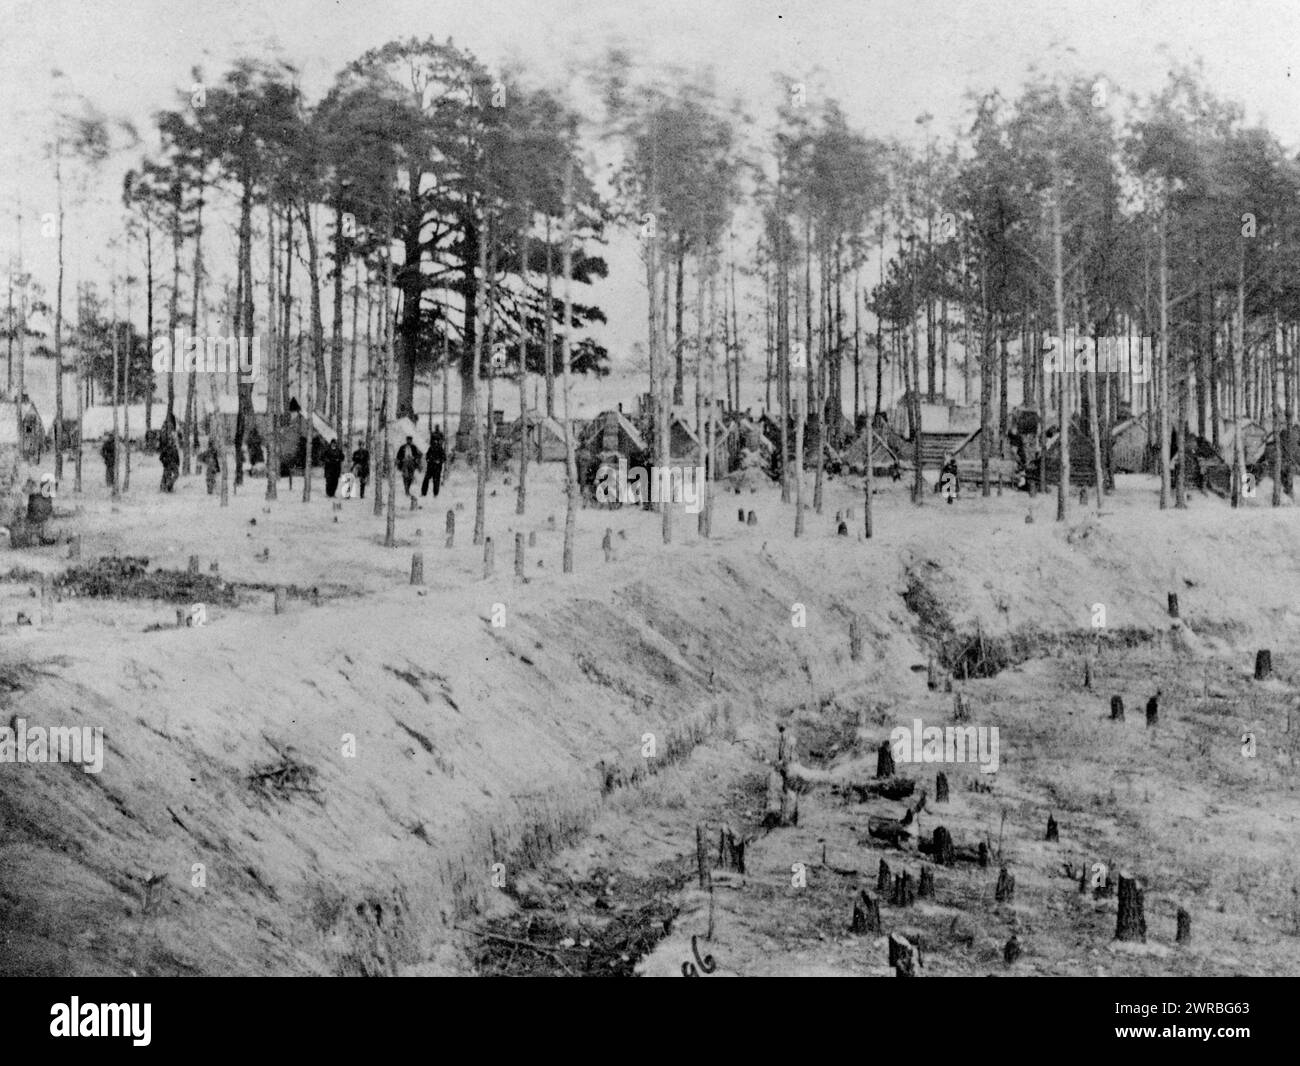 Camp of 27th U.S. Colored Infantry, photographed between 1861 and 1865, printed later, African Americans, Military service, 1860-1870, Photographic prints, 1860-1910., Photographic prints, 1860-1910, 1 photographic print Stock Photo